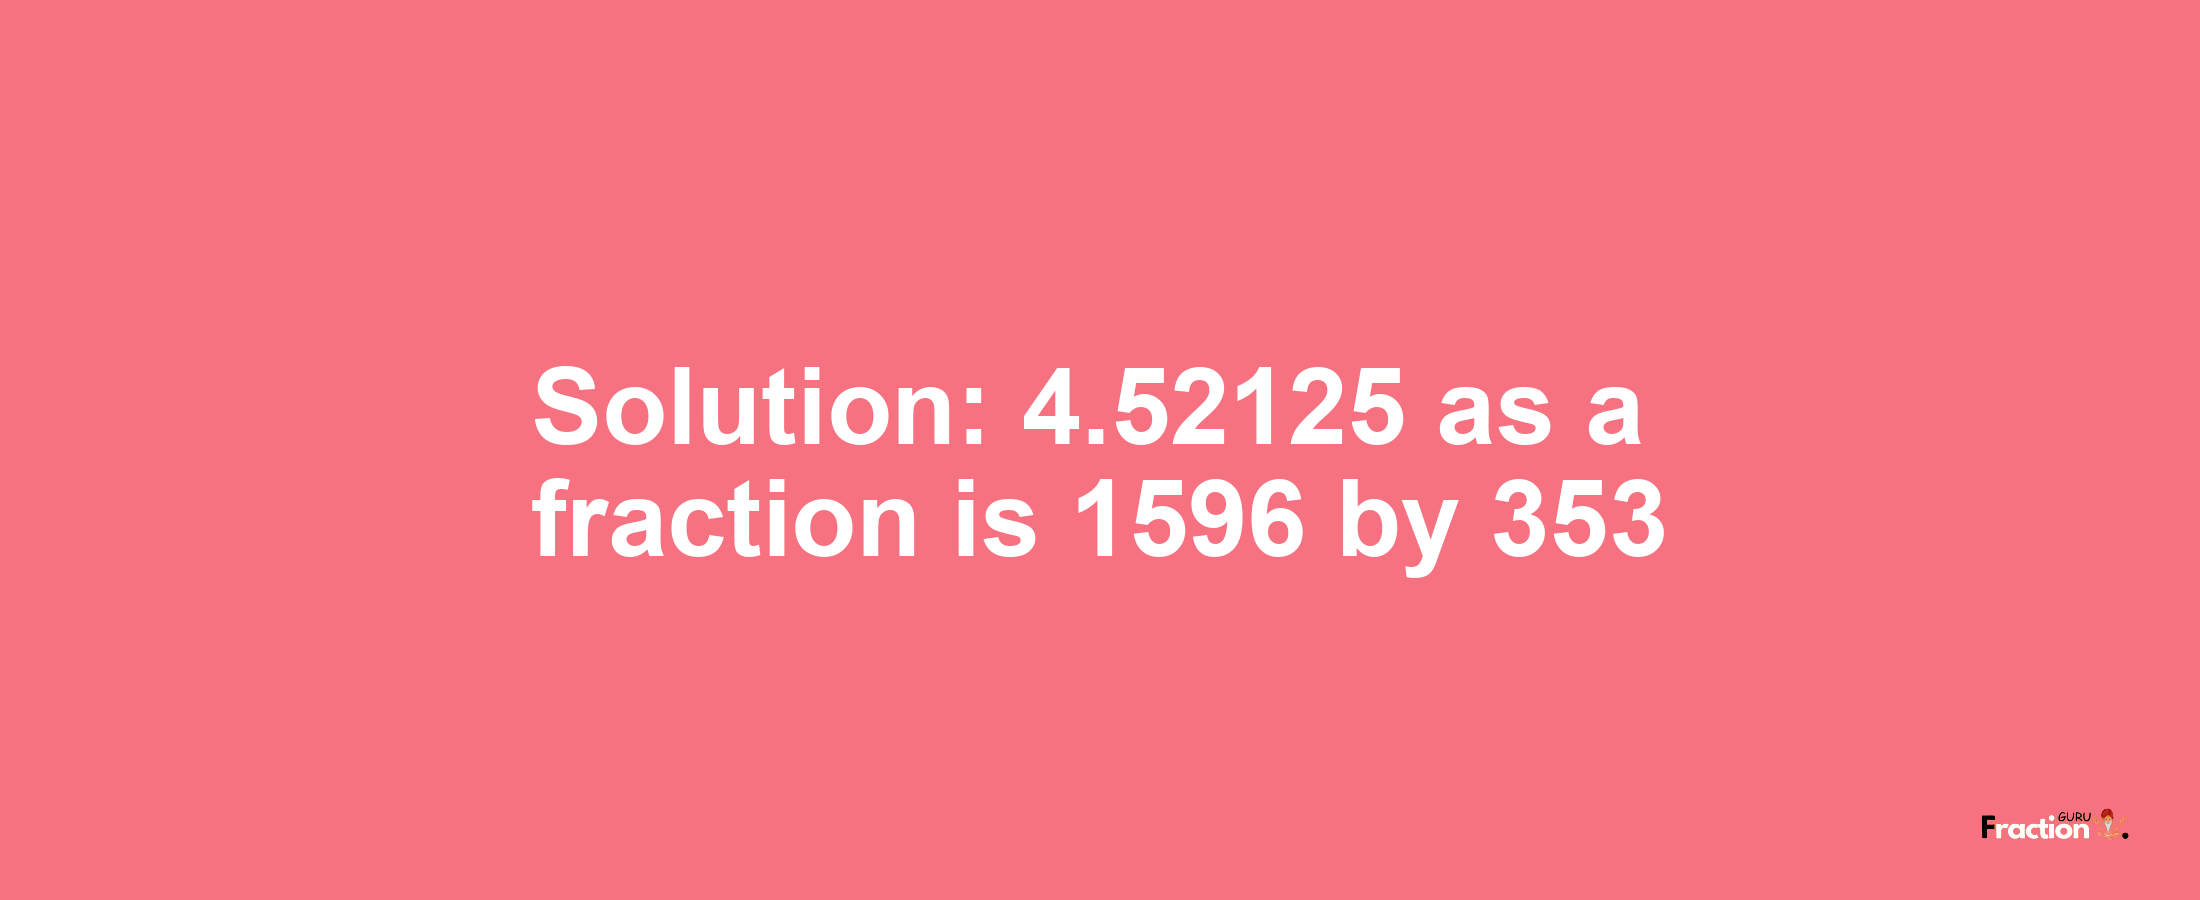 Solution:4.52125 as a fraction is 1596/353